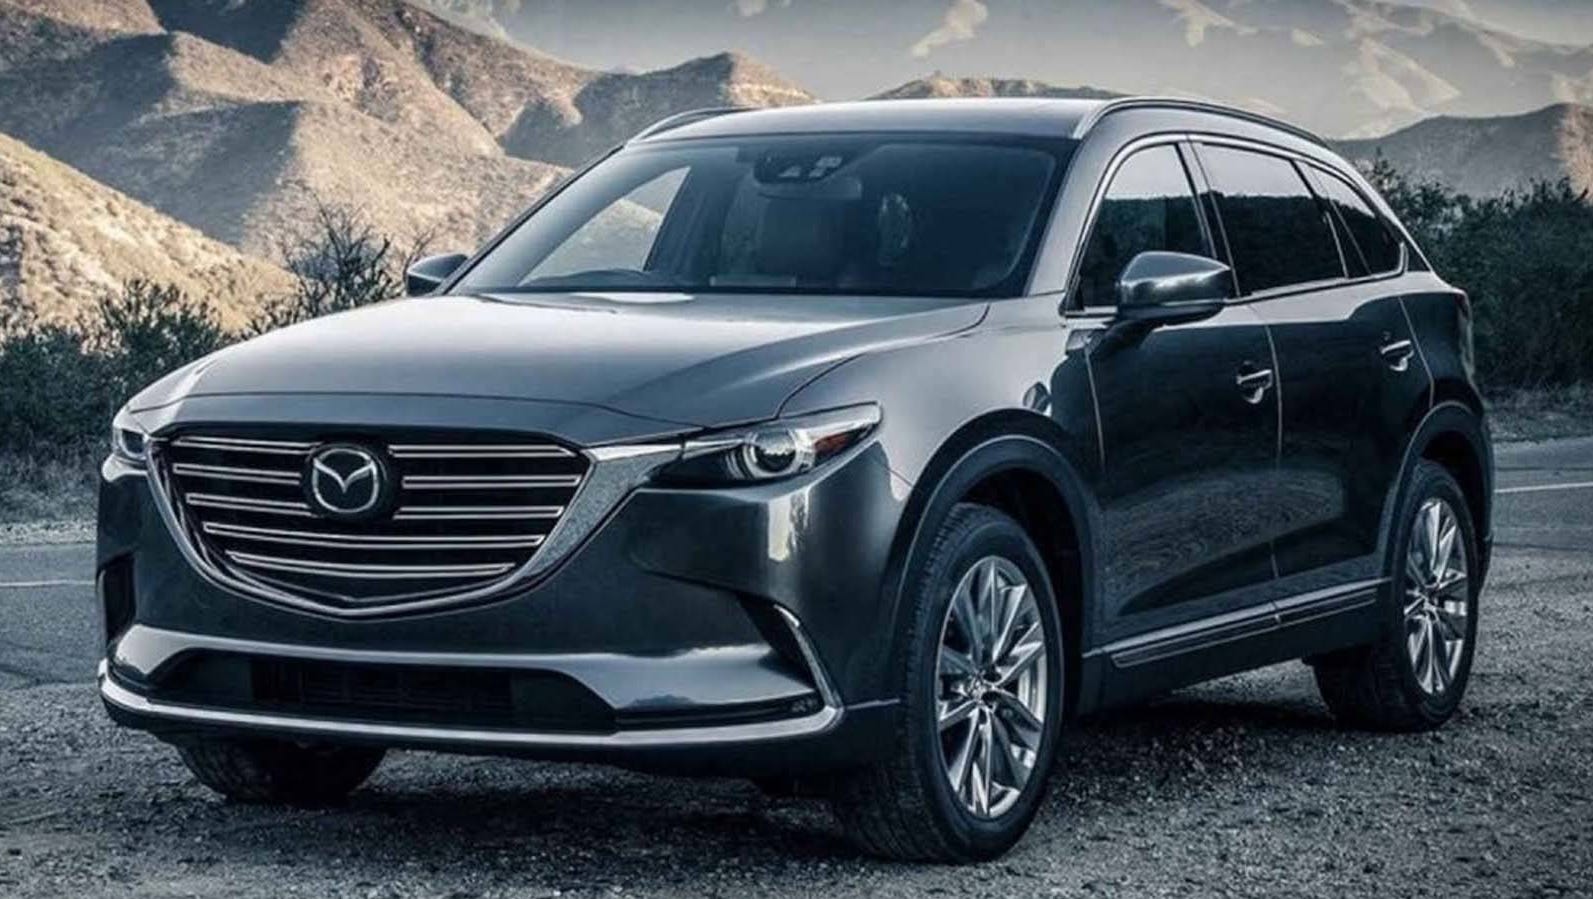 Redesigned 2018 Mazda CX-9 shows why it's top in class